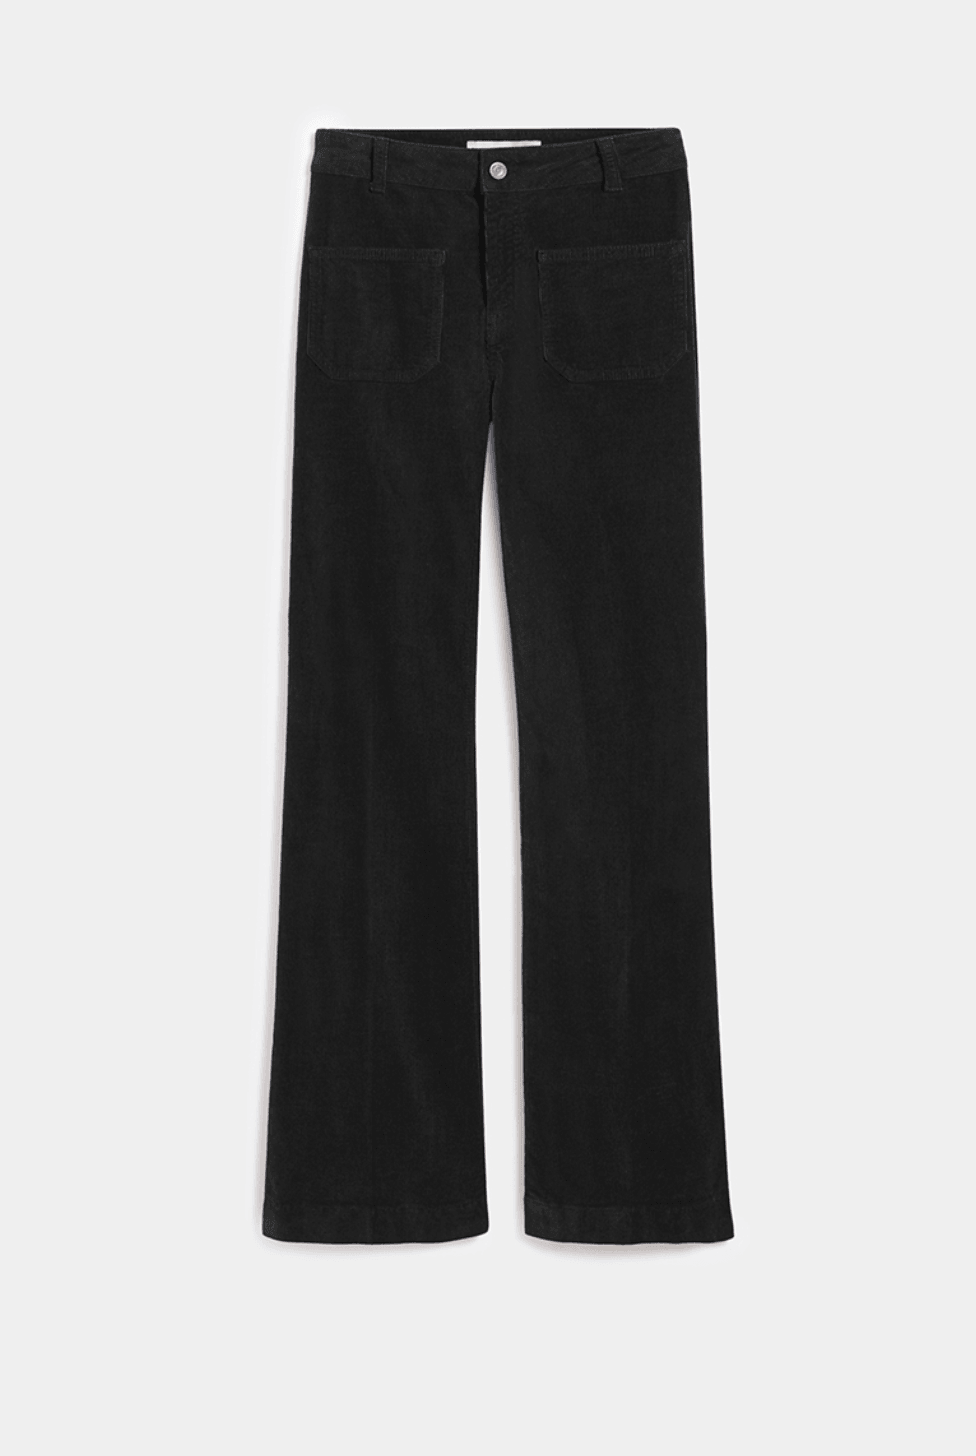 Vanessa Bruno - Dompay Noir Corduroy Flared Trousers - 32 The Guild